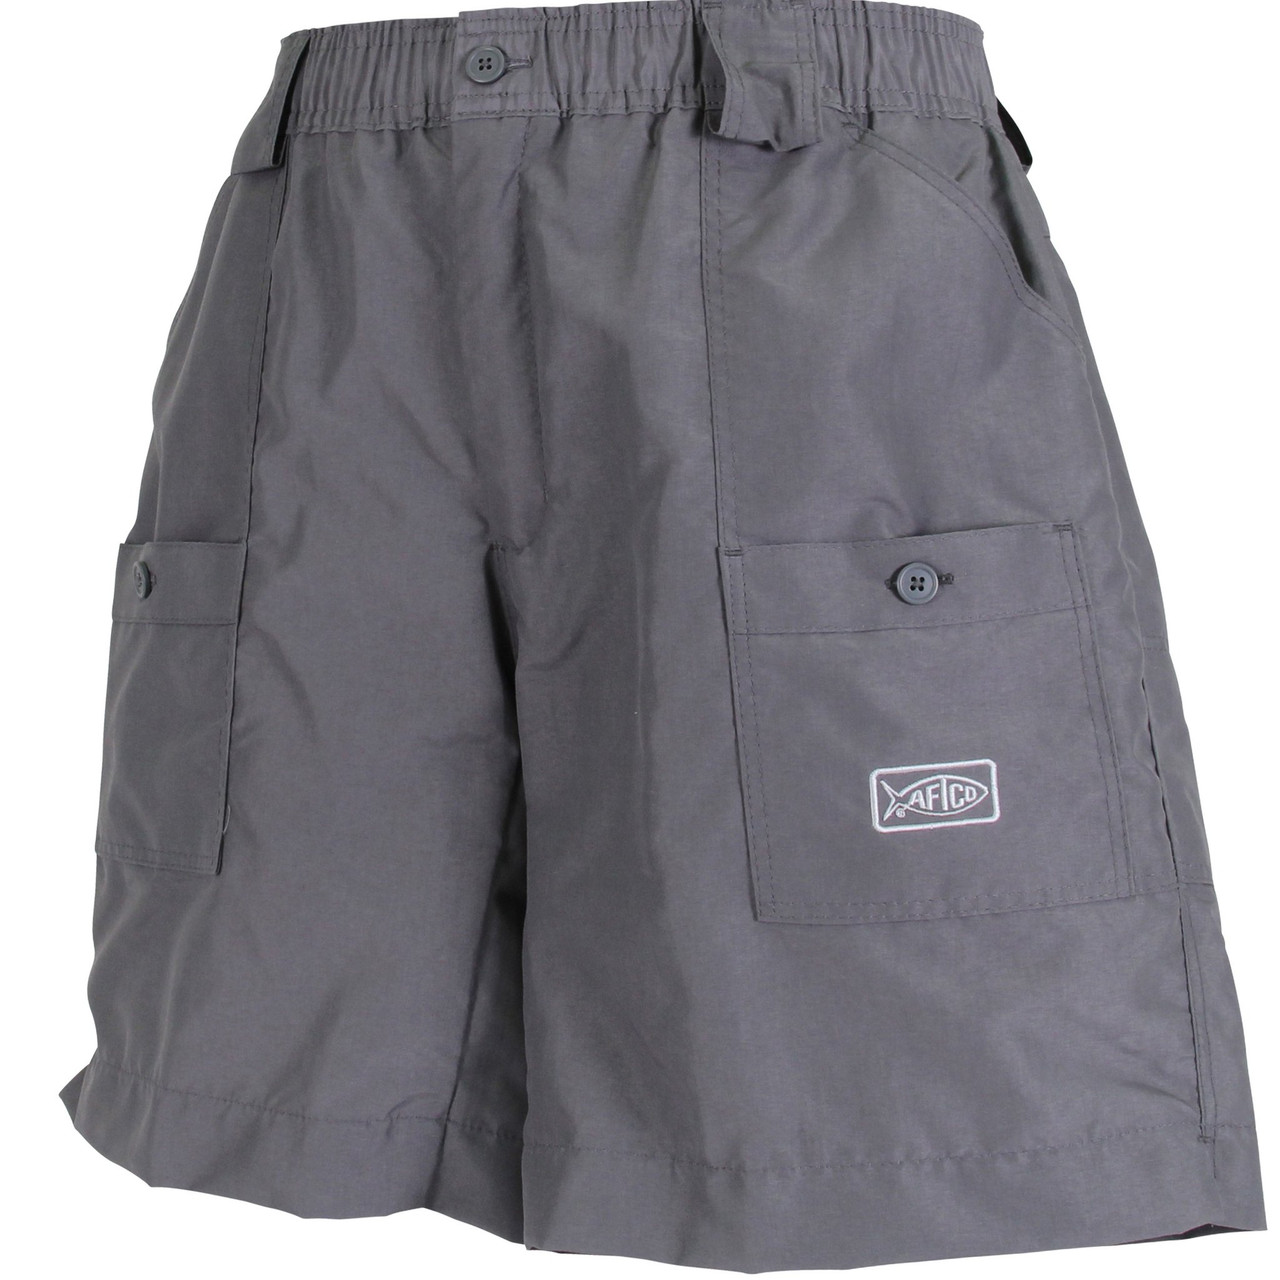 The Original Fishing Short Long by Aftco - 8 Inseam